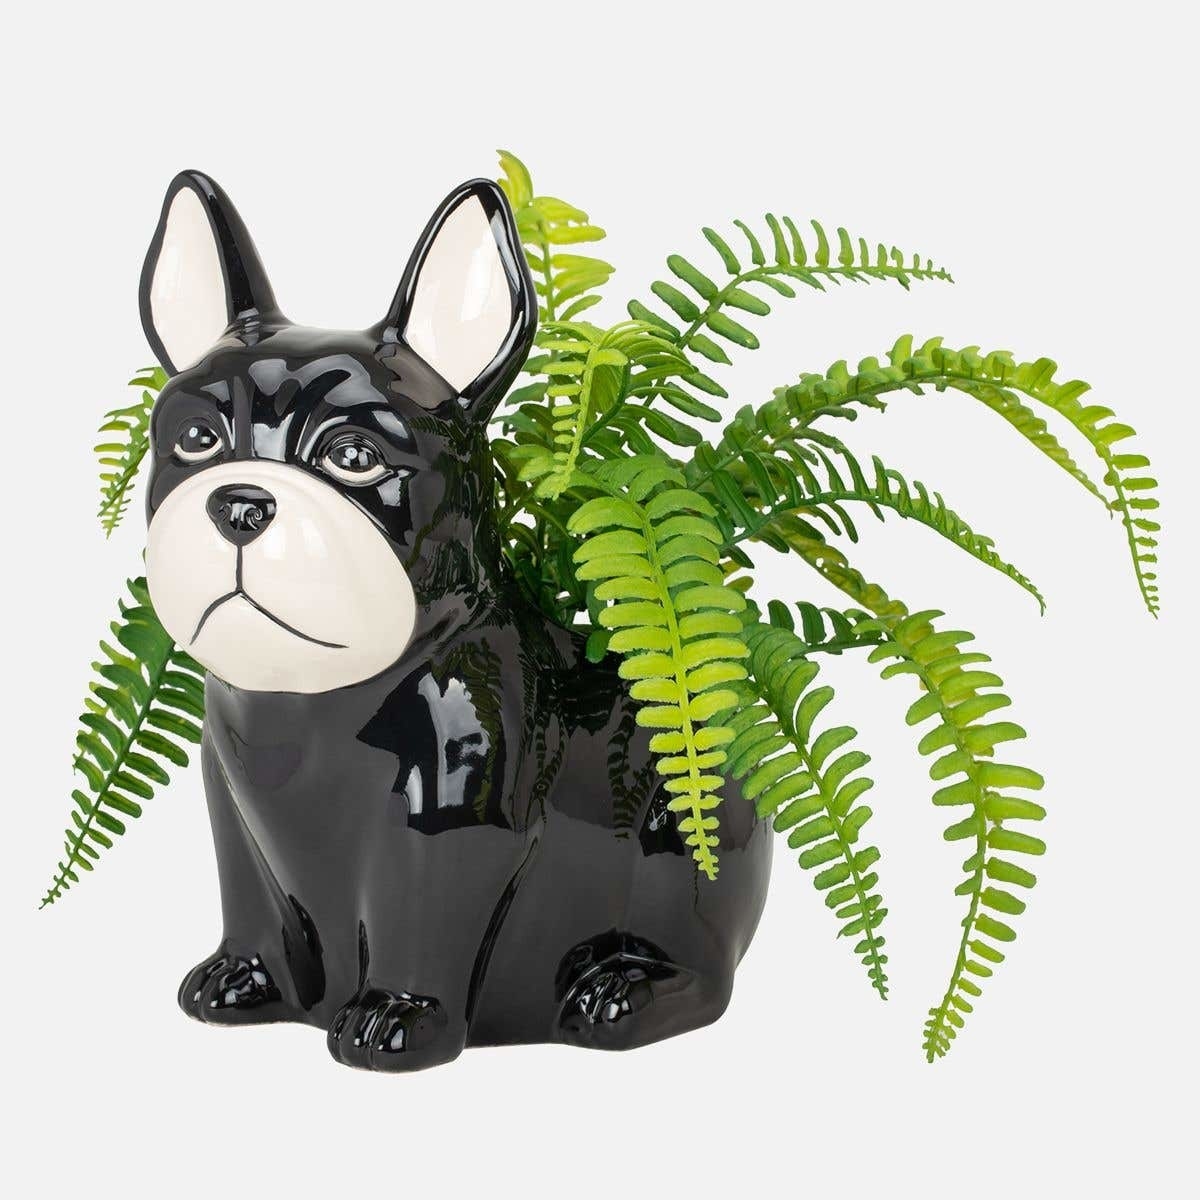 A ceramic plant pot in the shape of a small dog